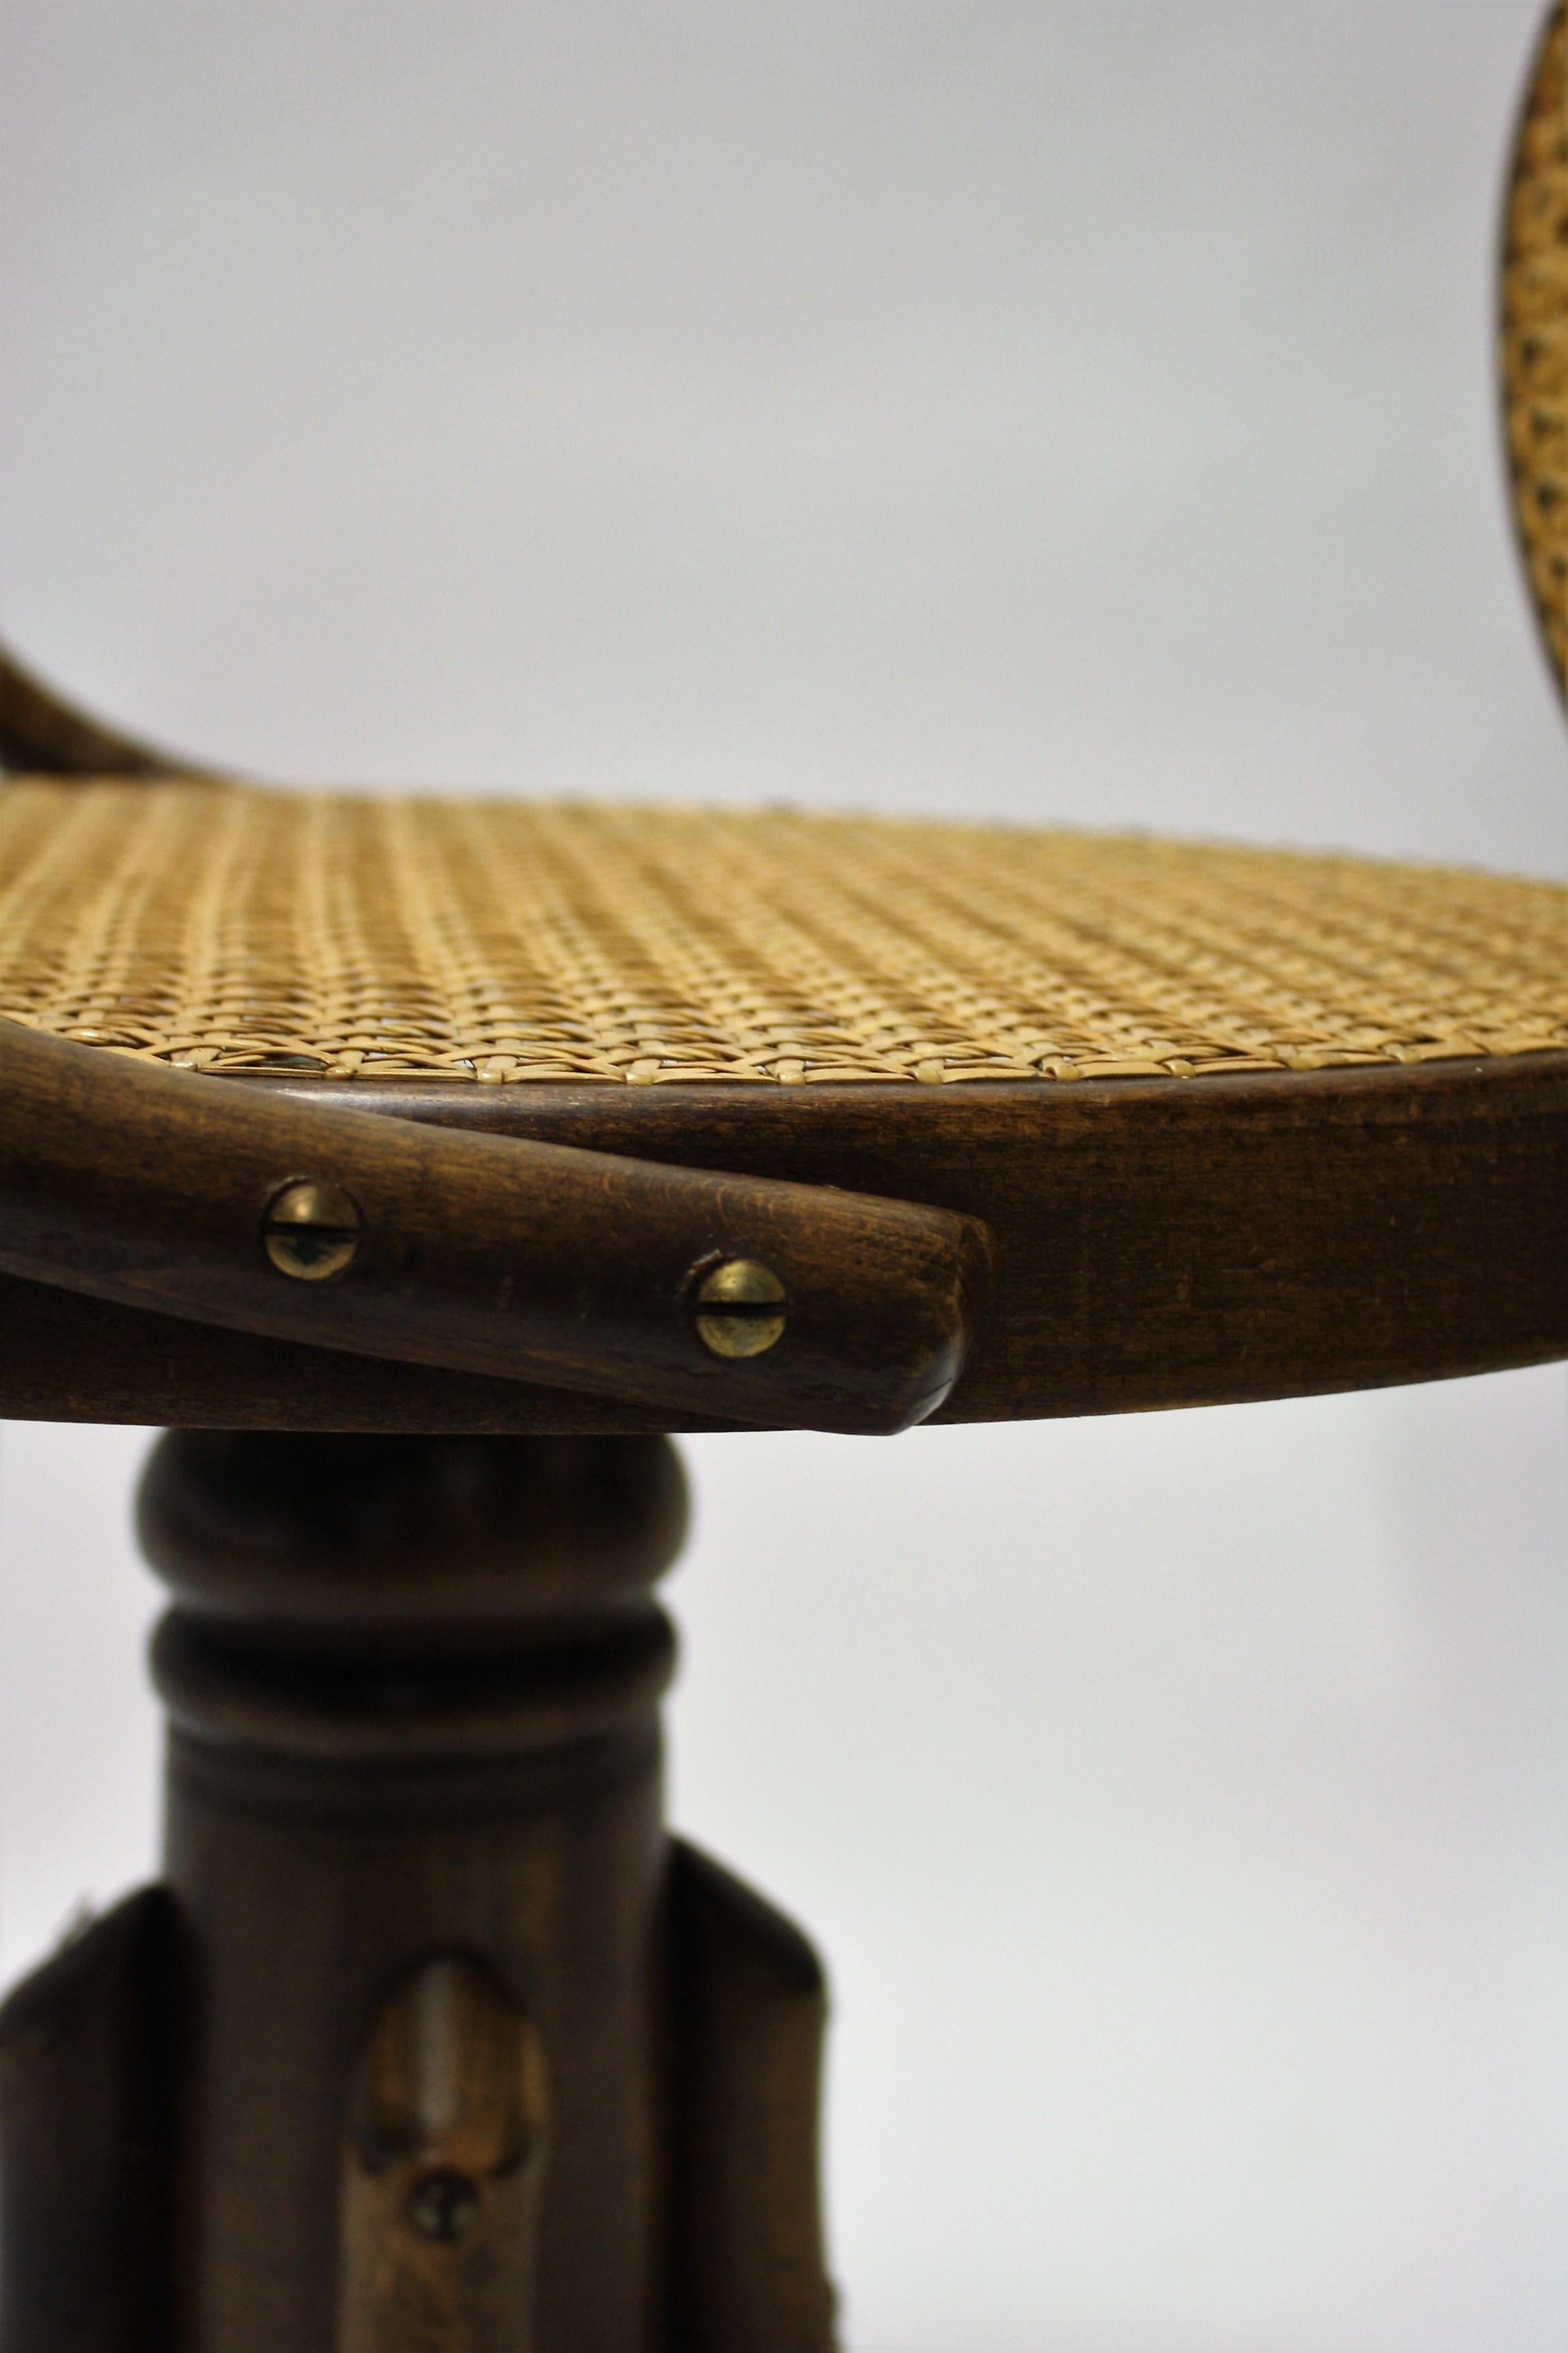 Cane Antique Desk Chair by Thonet, 1900s